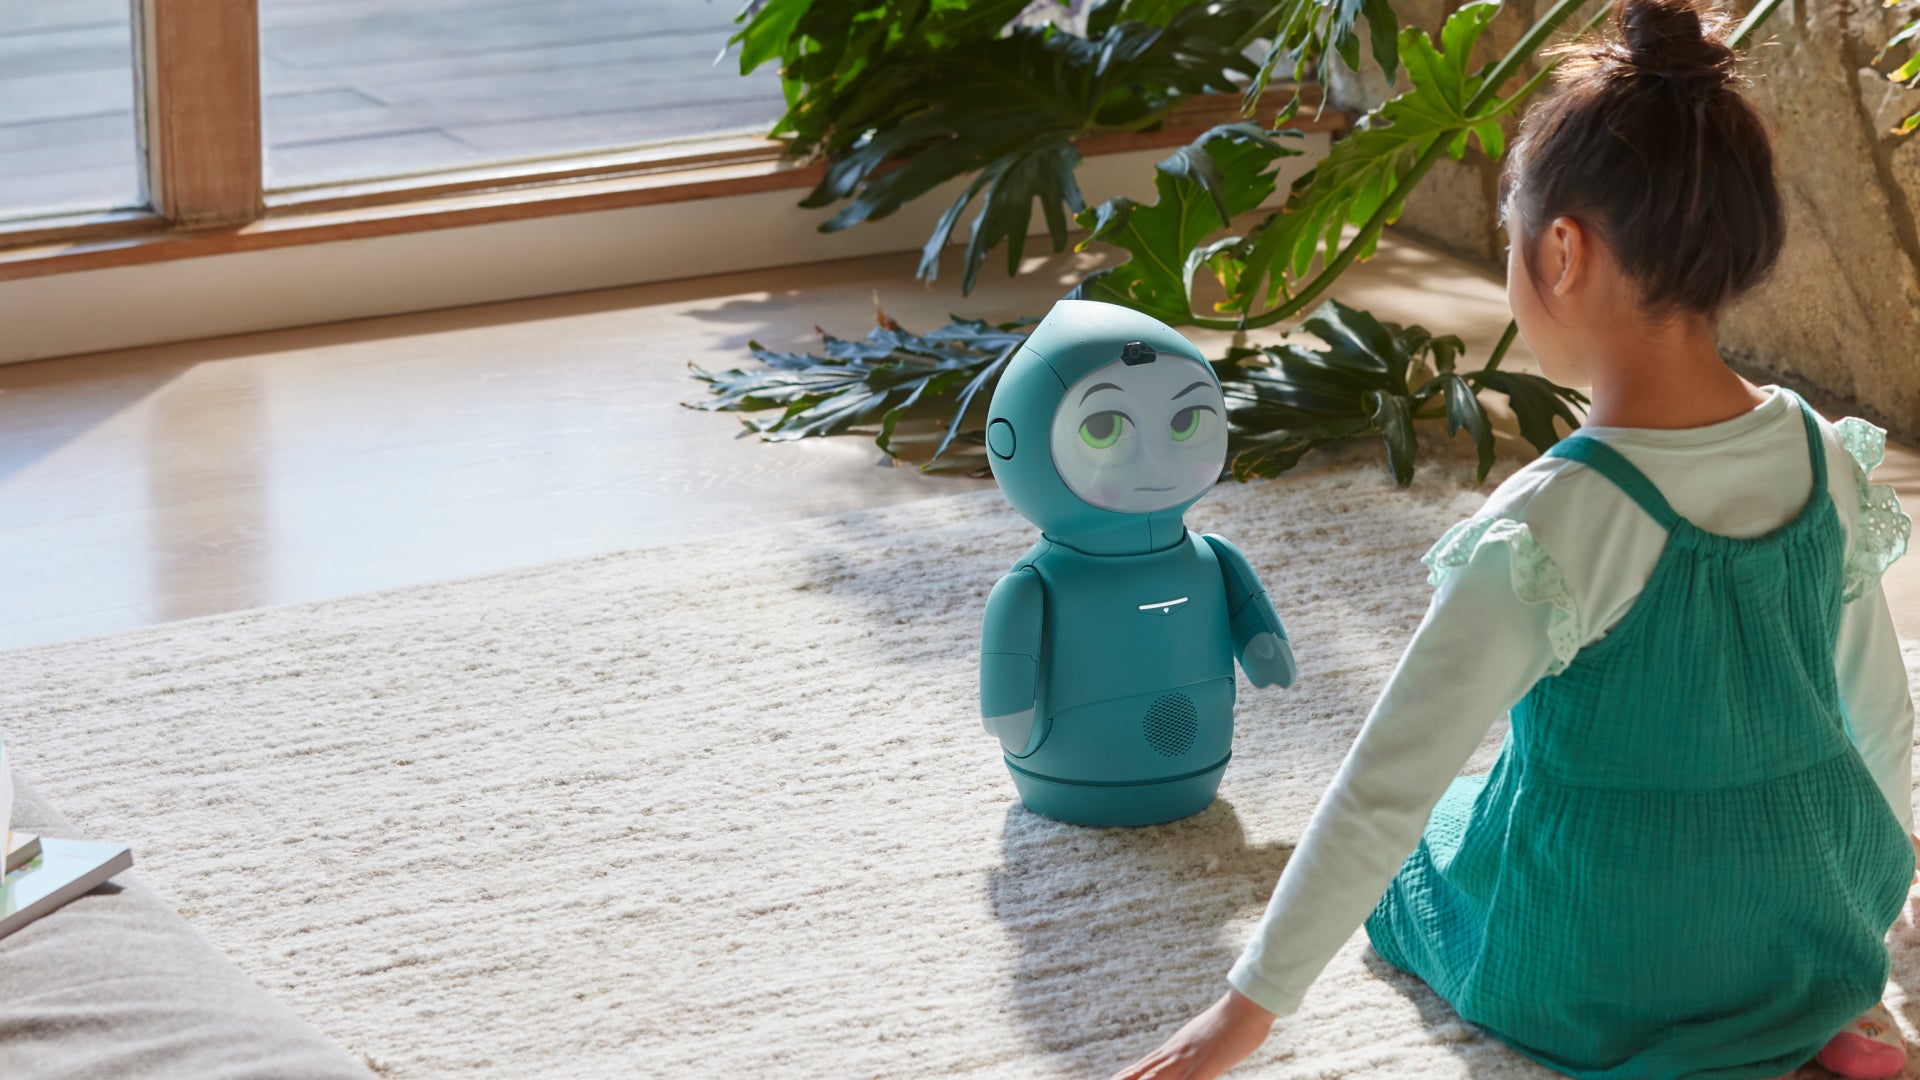 Moxie, Embedded's New Robot, Aims To Teach Kids Emotions 